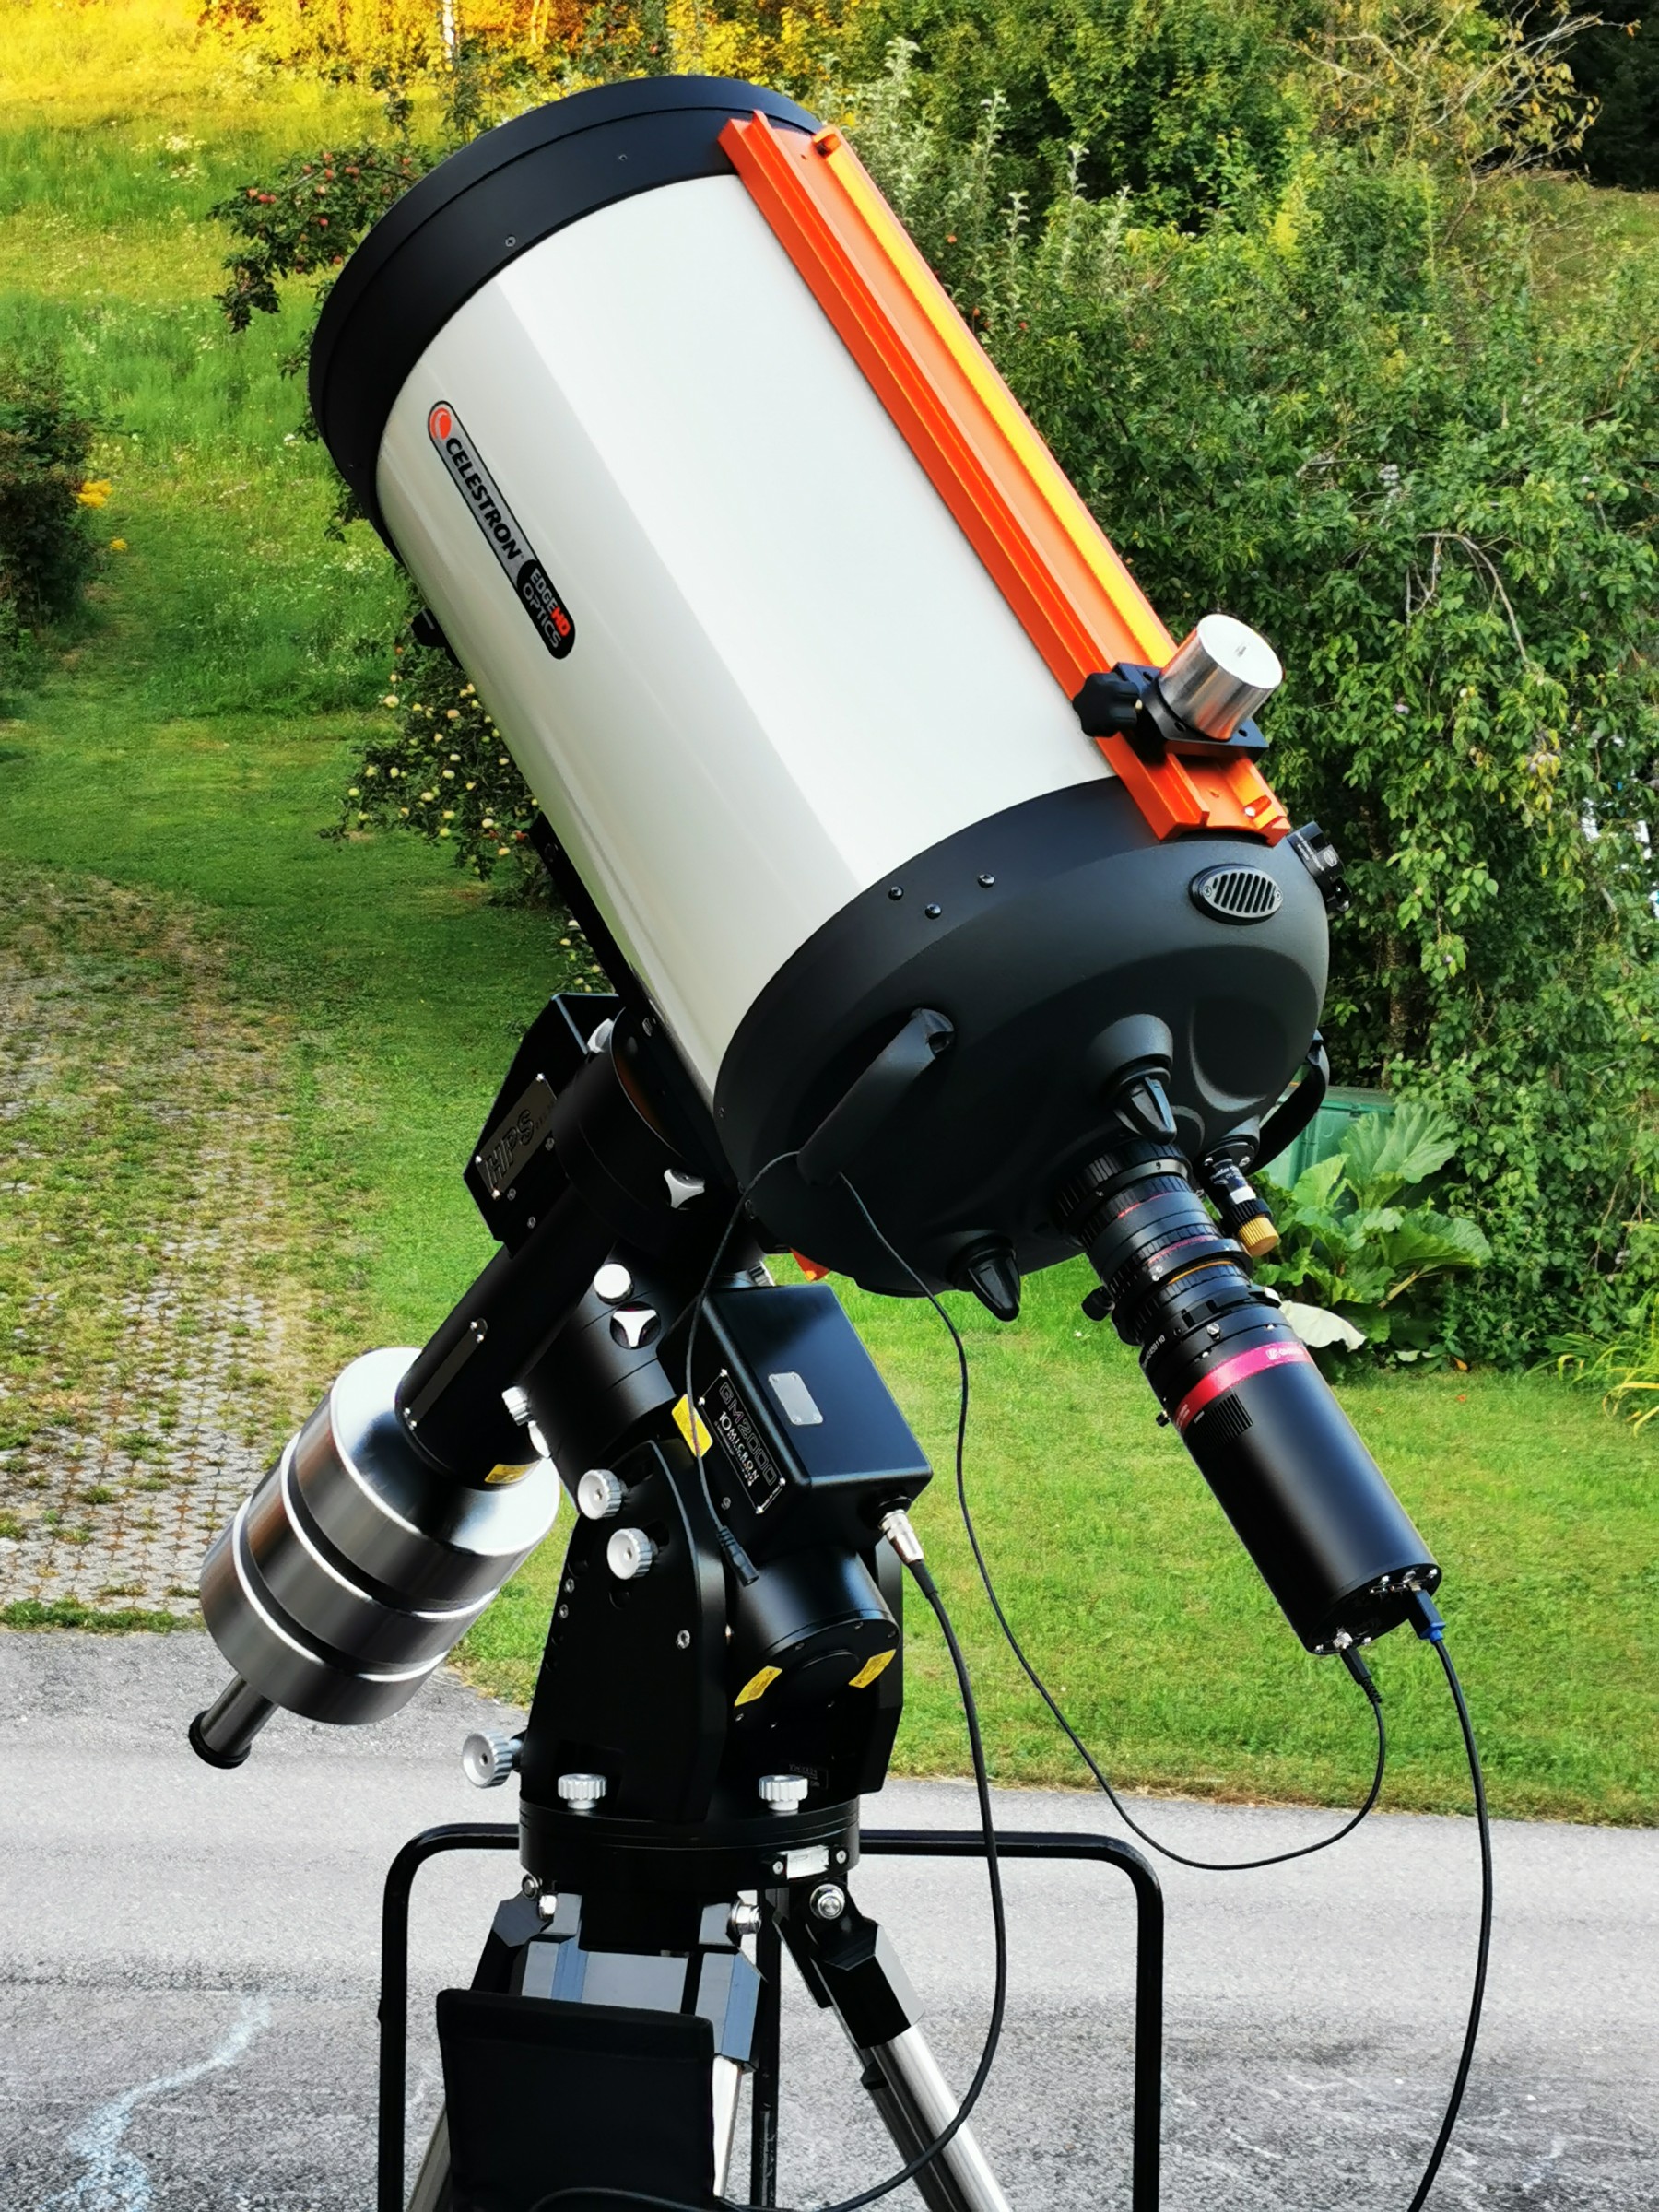 Application image: Celestron C11 EdgeHD with QHY600 PRO